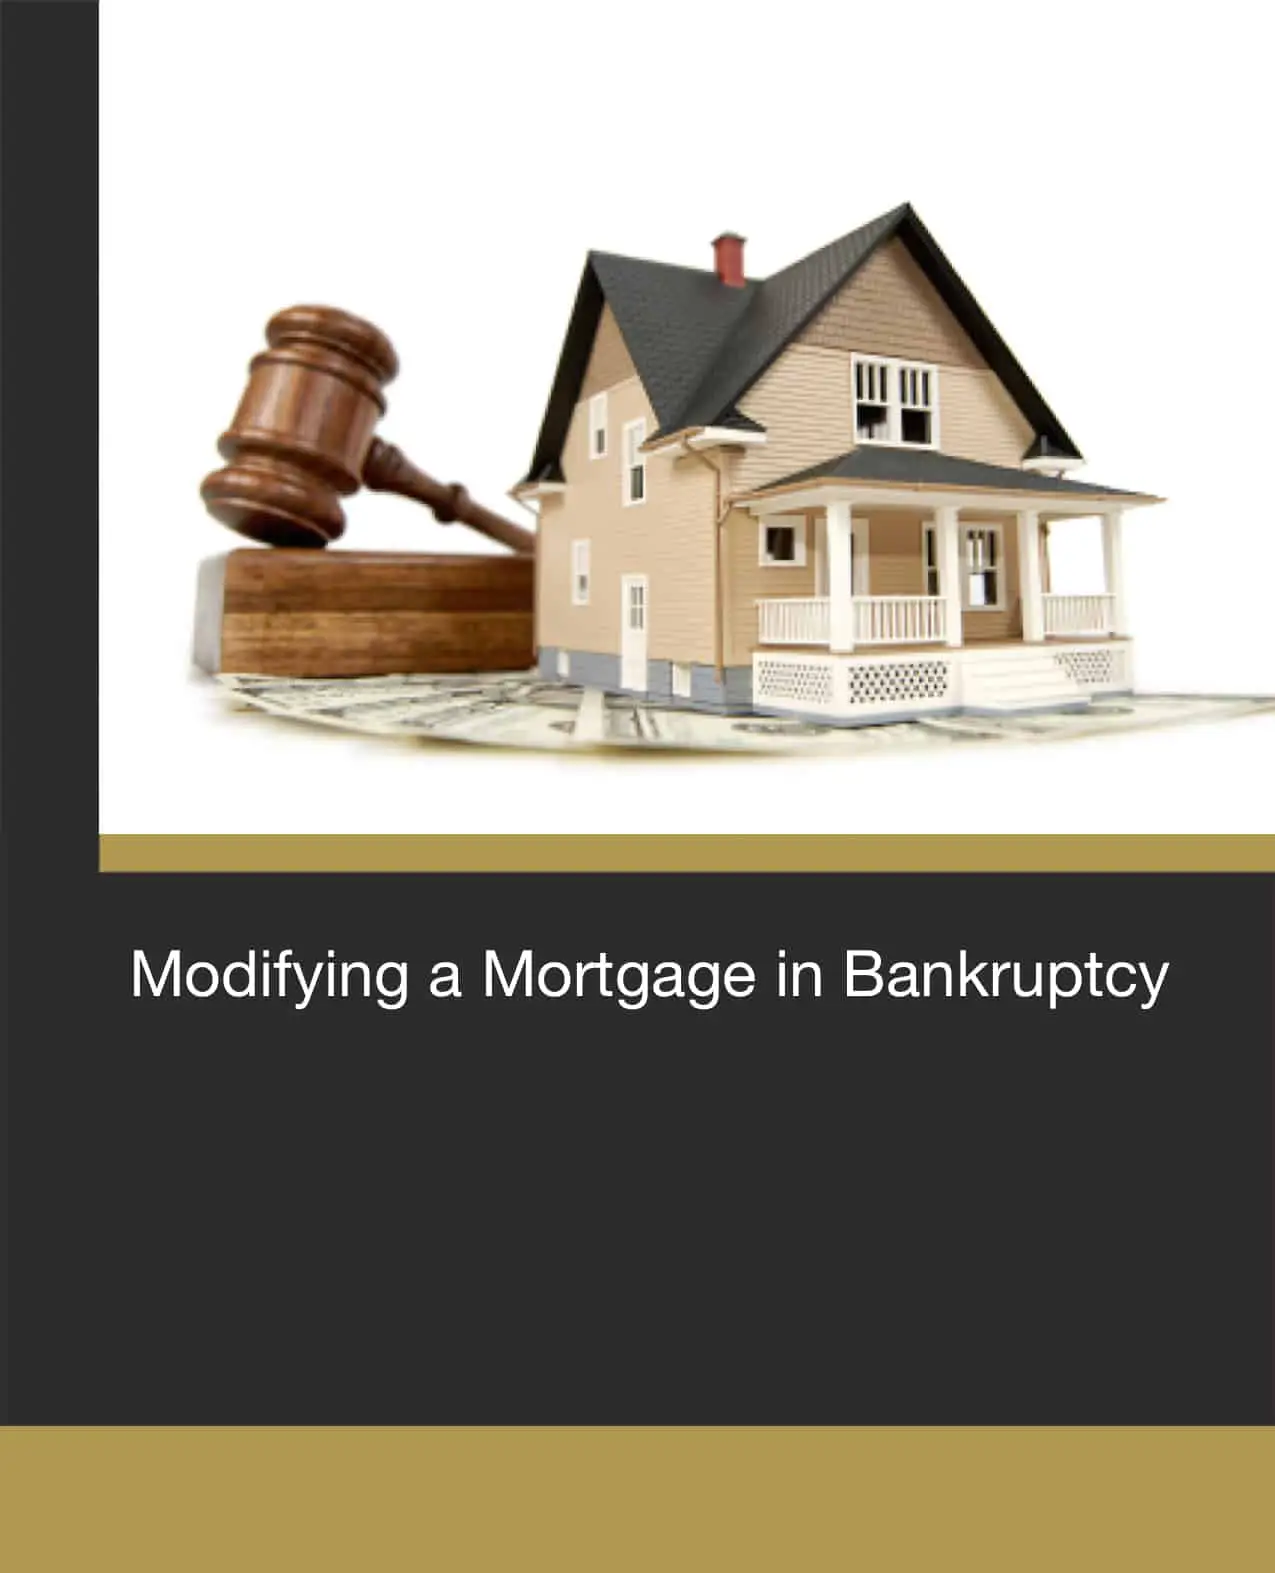 Modifying a Mortgage in Bankruptcy